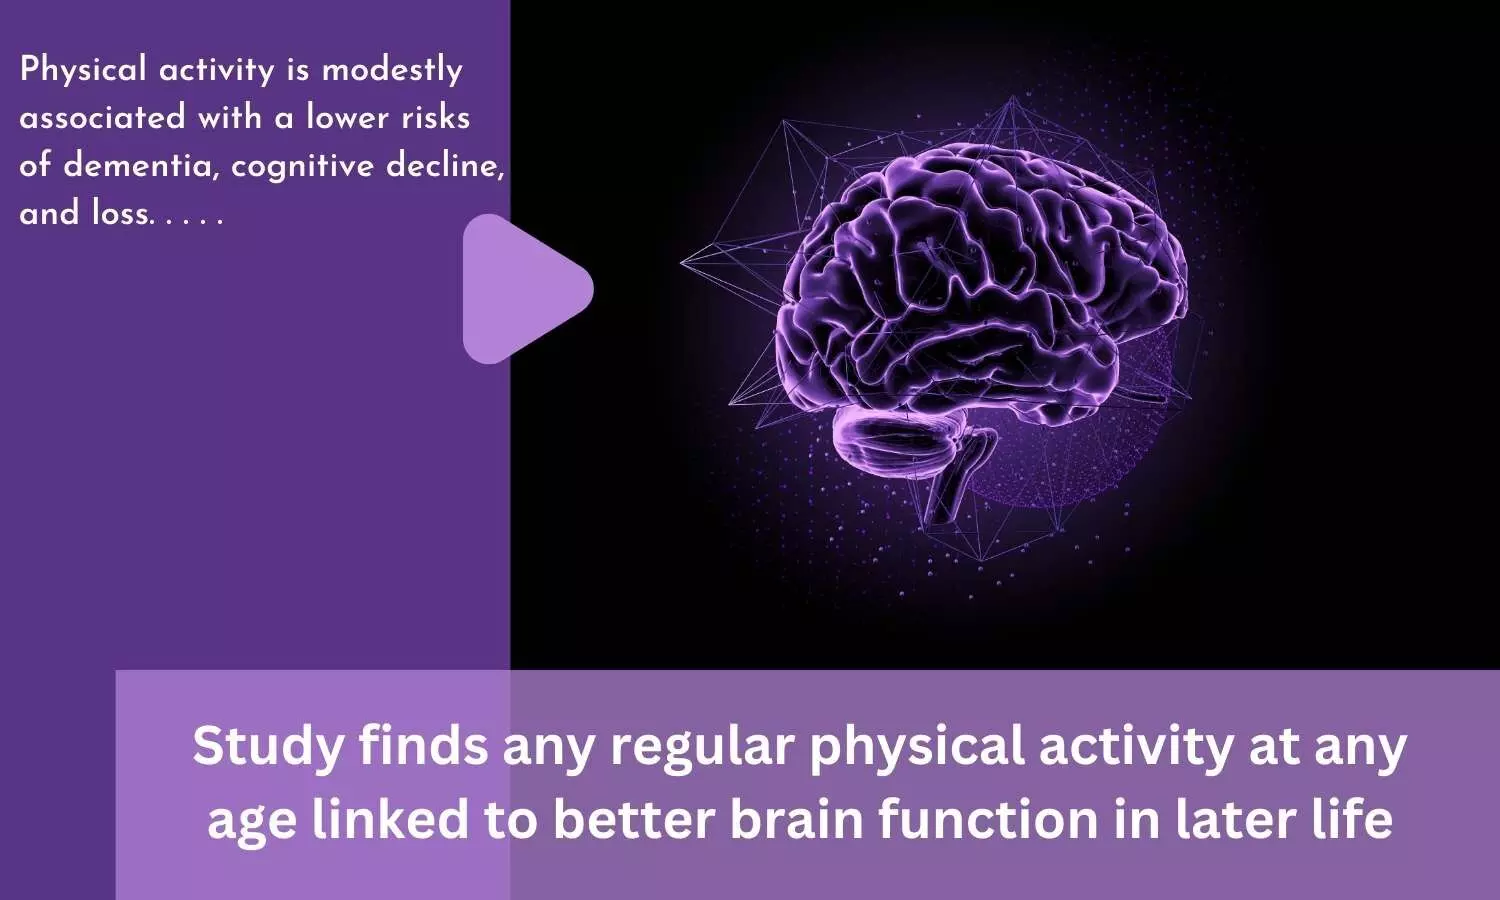 Study finds any regular physical activity at any age linked to better brain function in later life